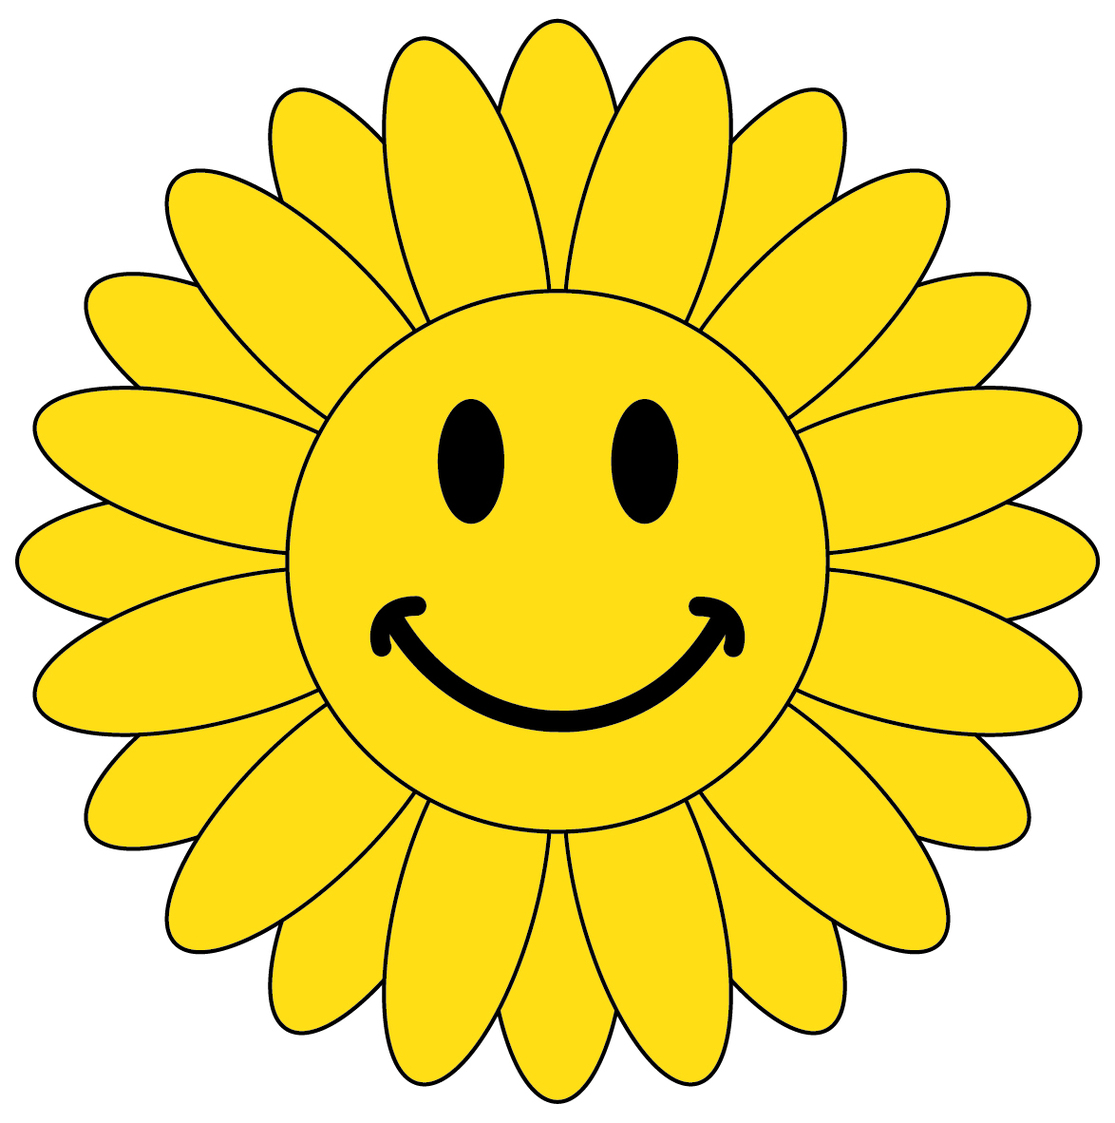 Smiley Sol Clipart - Free to use Clip Art Resource